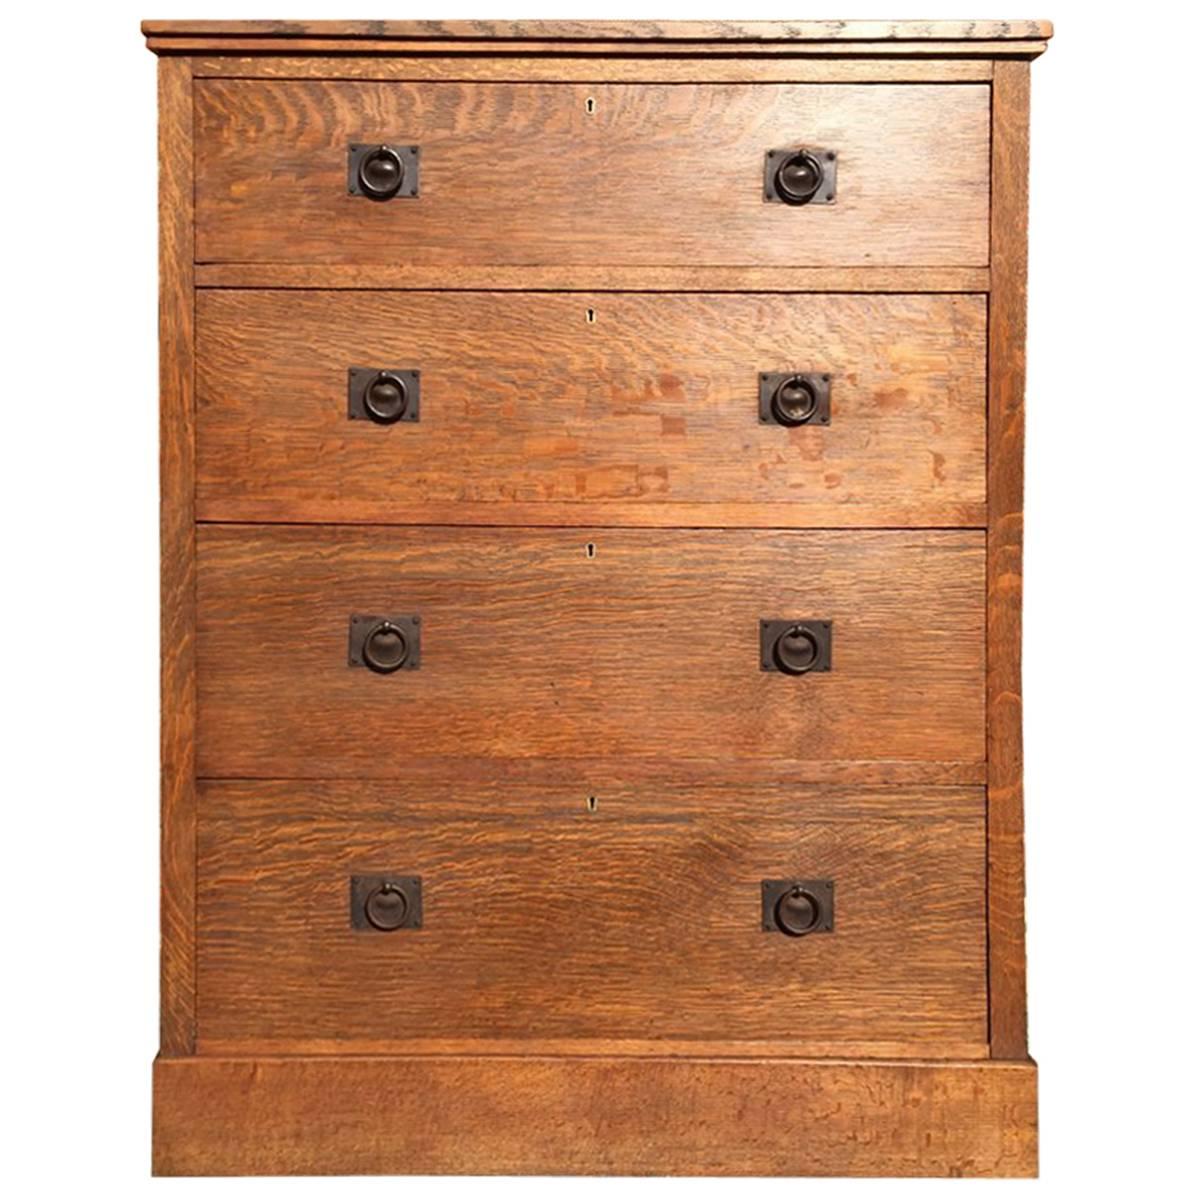 Heals attri, A Tall Arts & Crafts Oak Chest of Drawers with Steel Handles